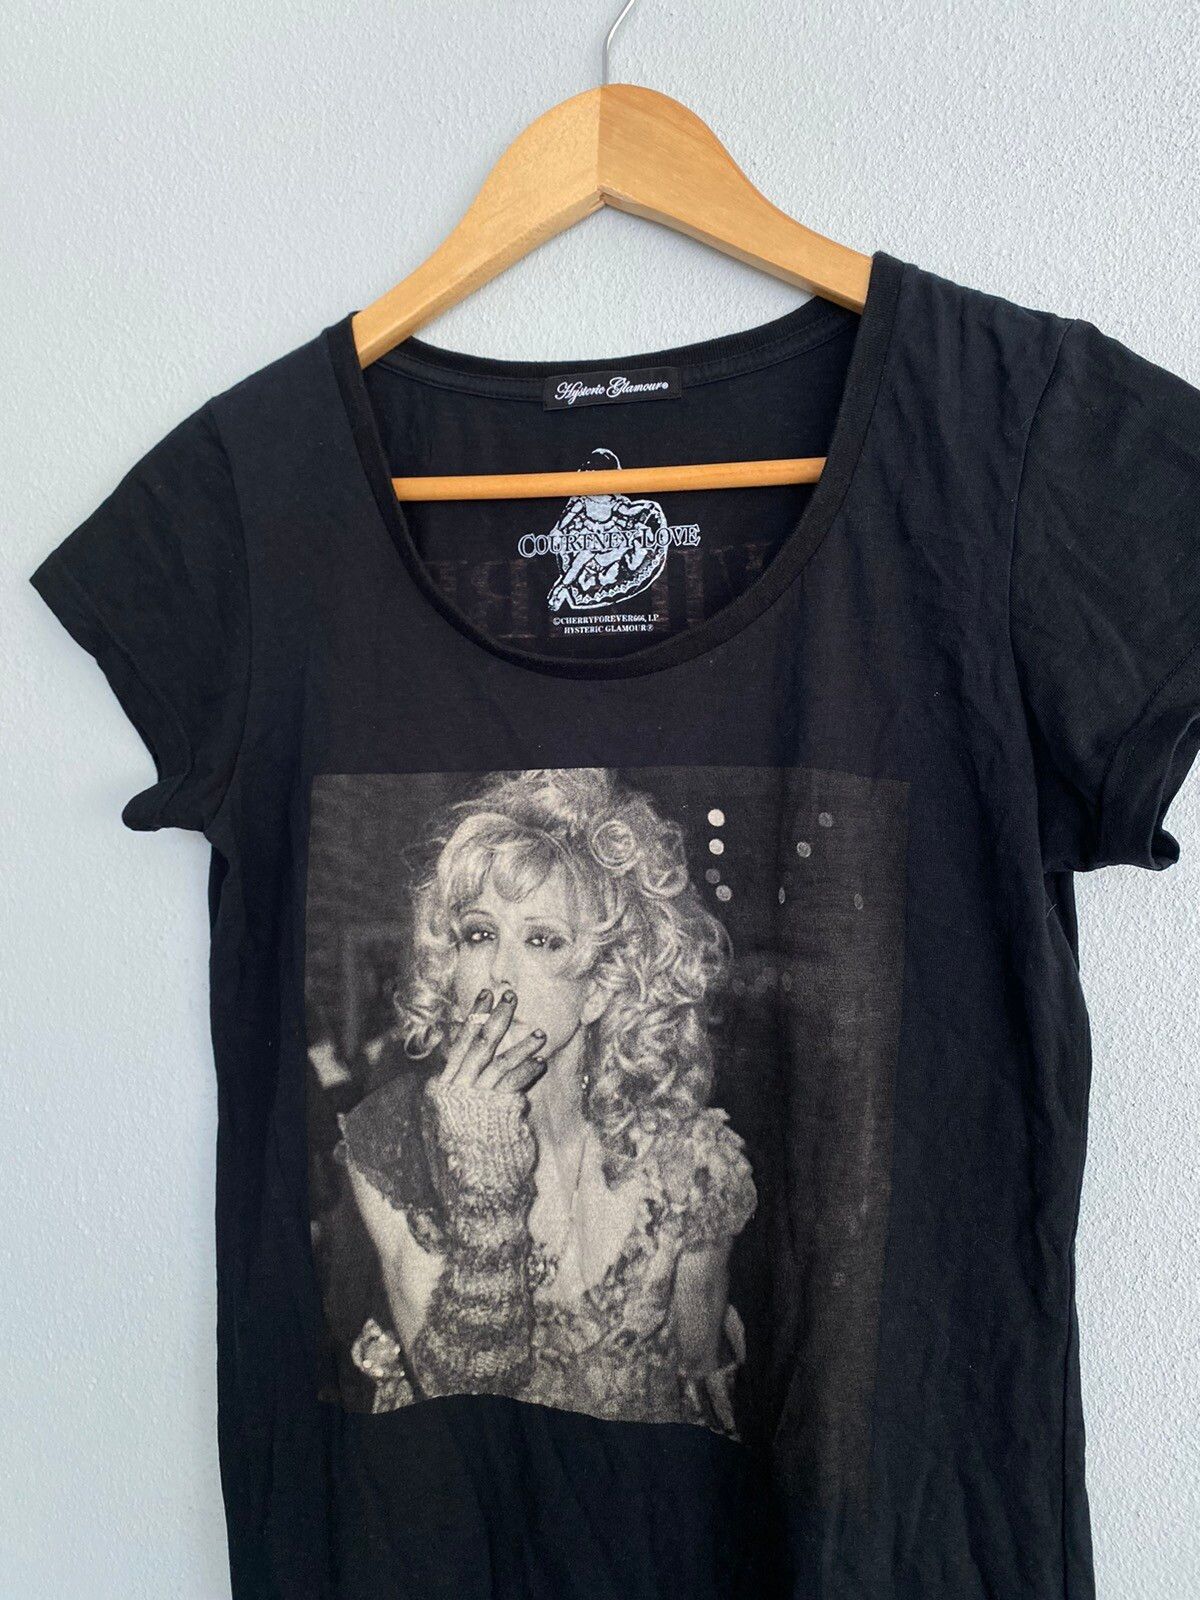 Hysteric Glamour x Courtney Love I Will Be Swan Swan tees - 2